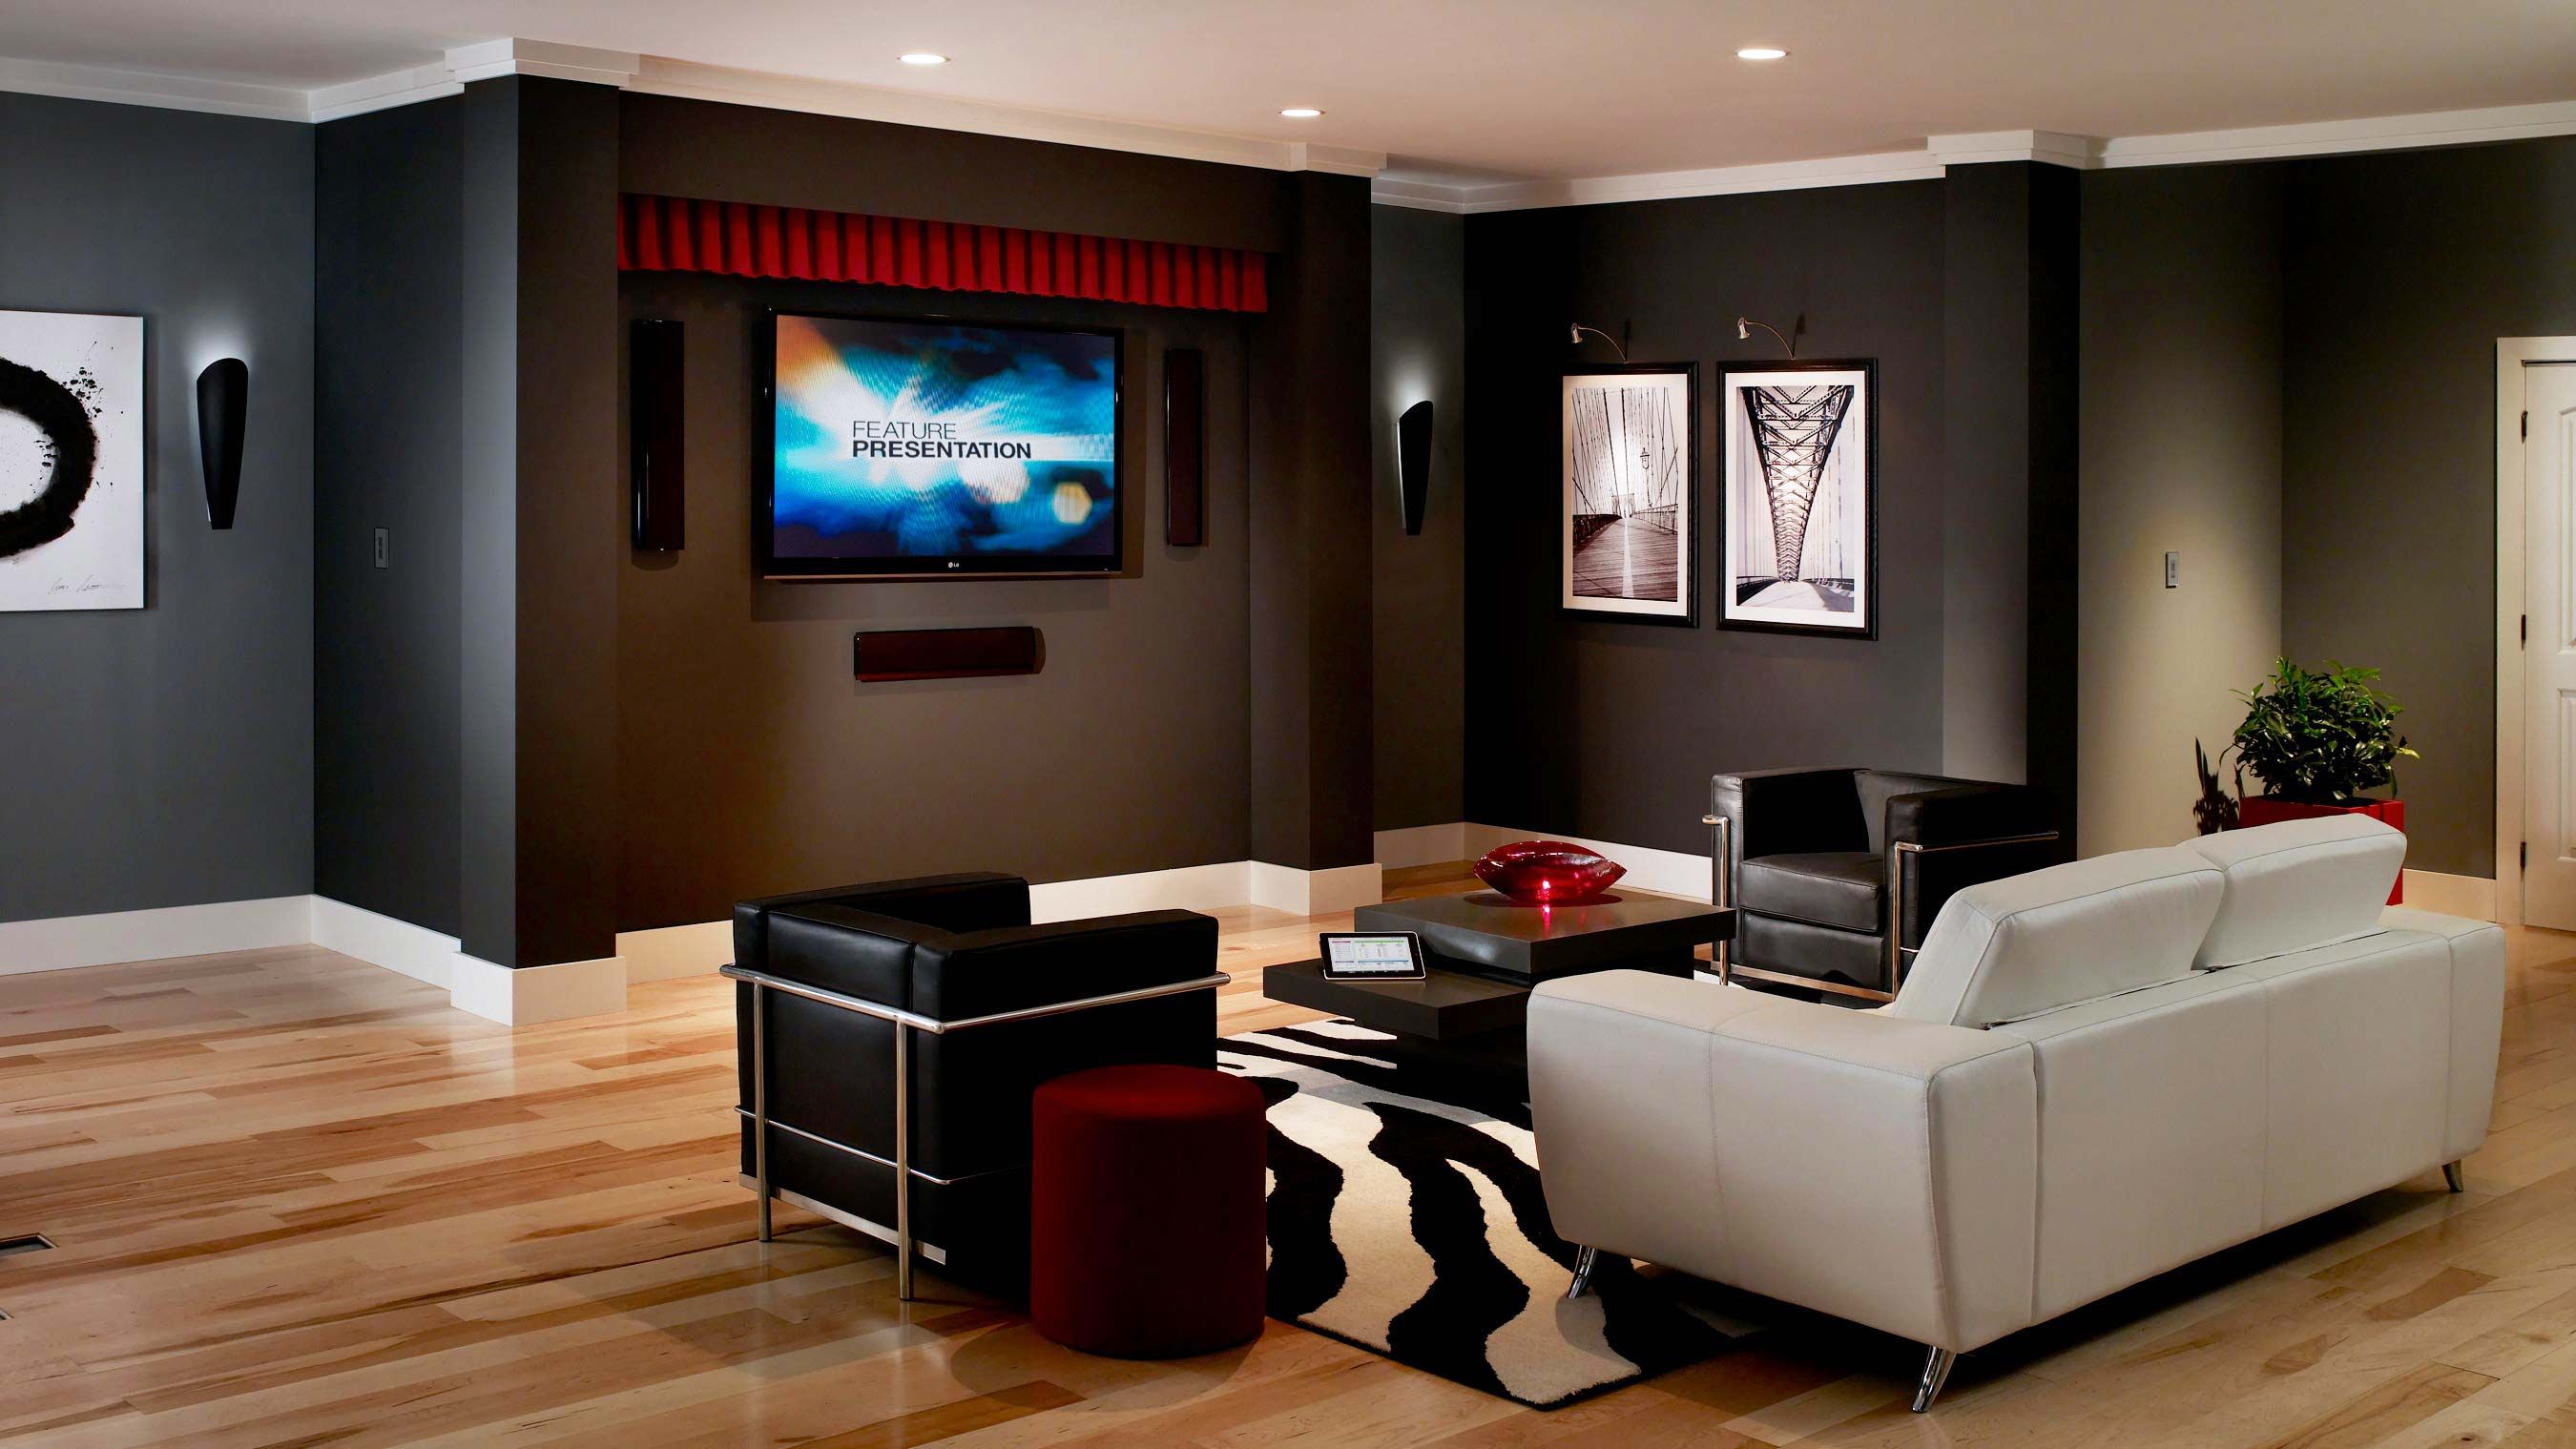 Control4 Dealer Austin, TX, home control, indoor automation, home automation, media room, high-performance audio, smart home control4